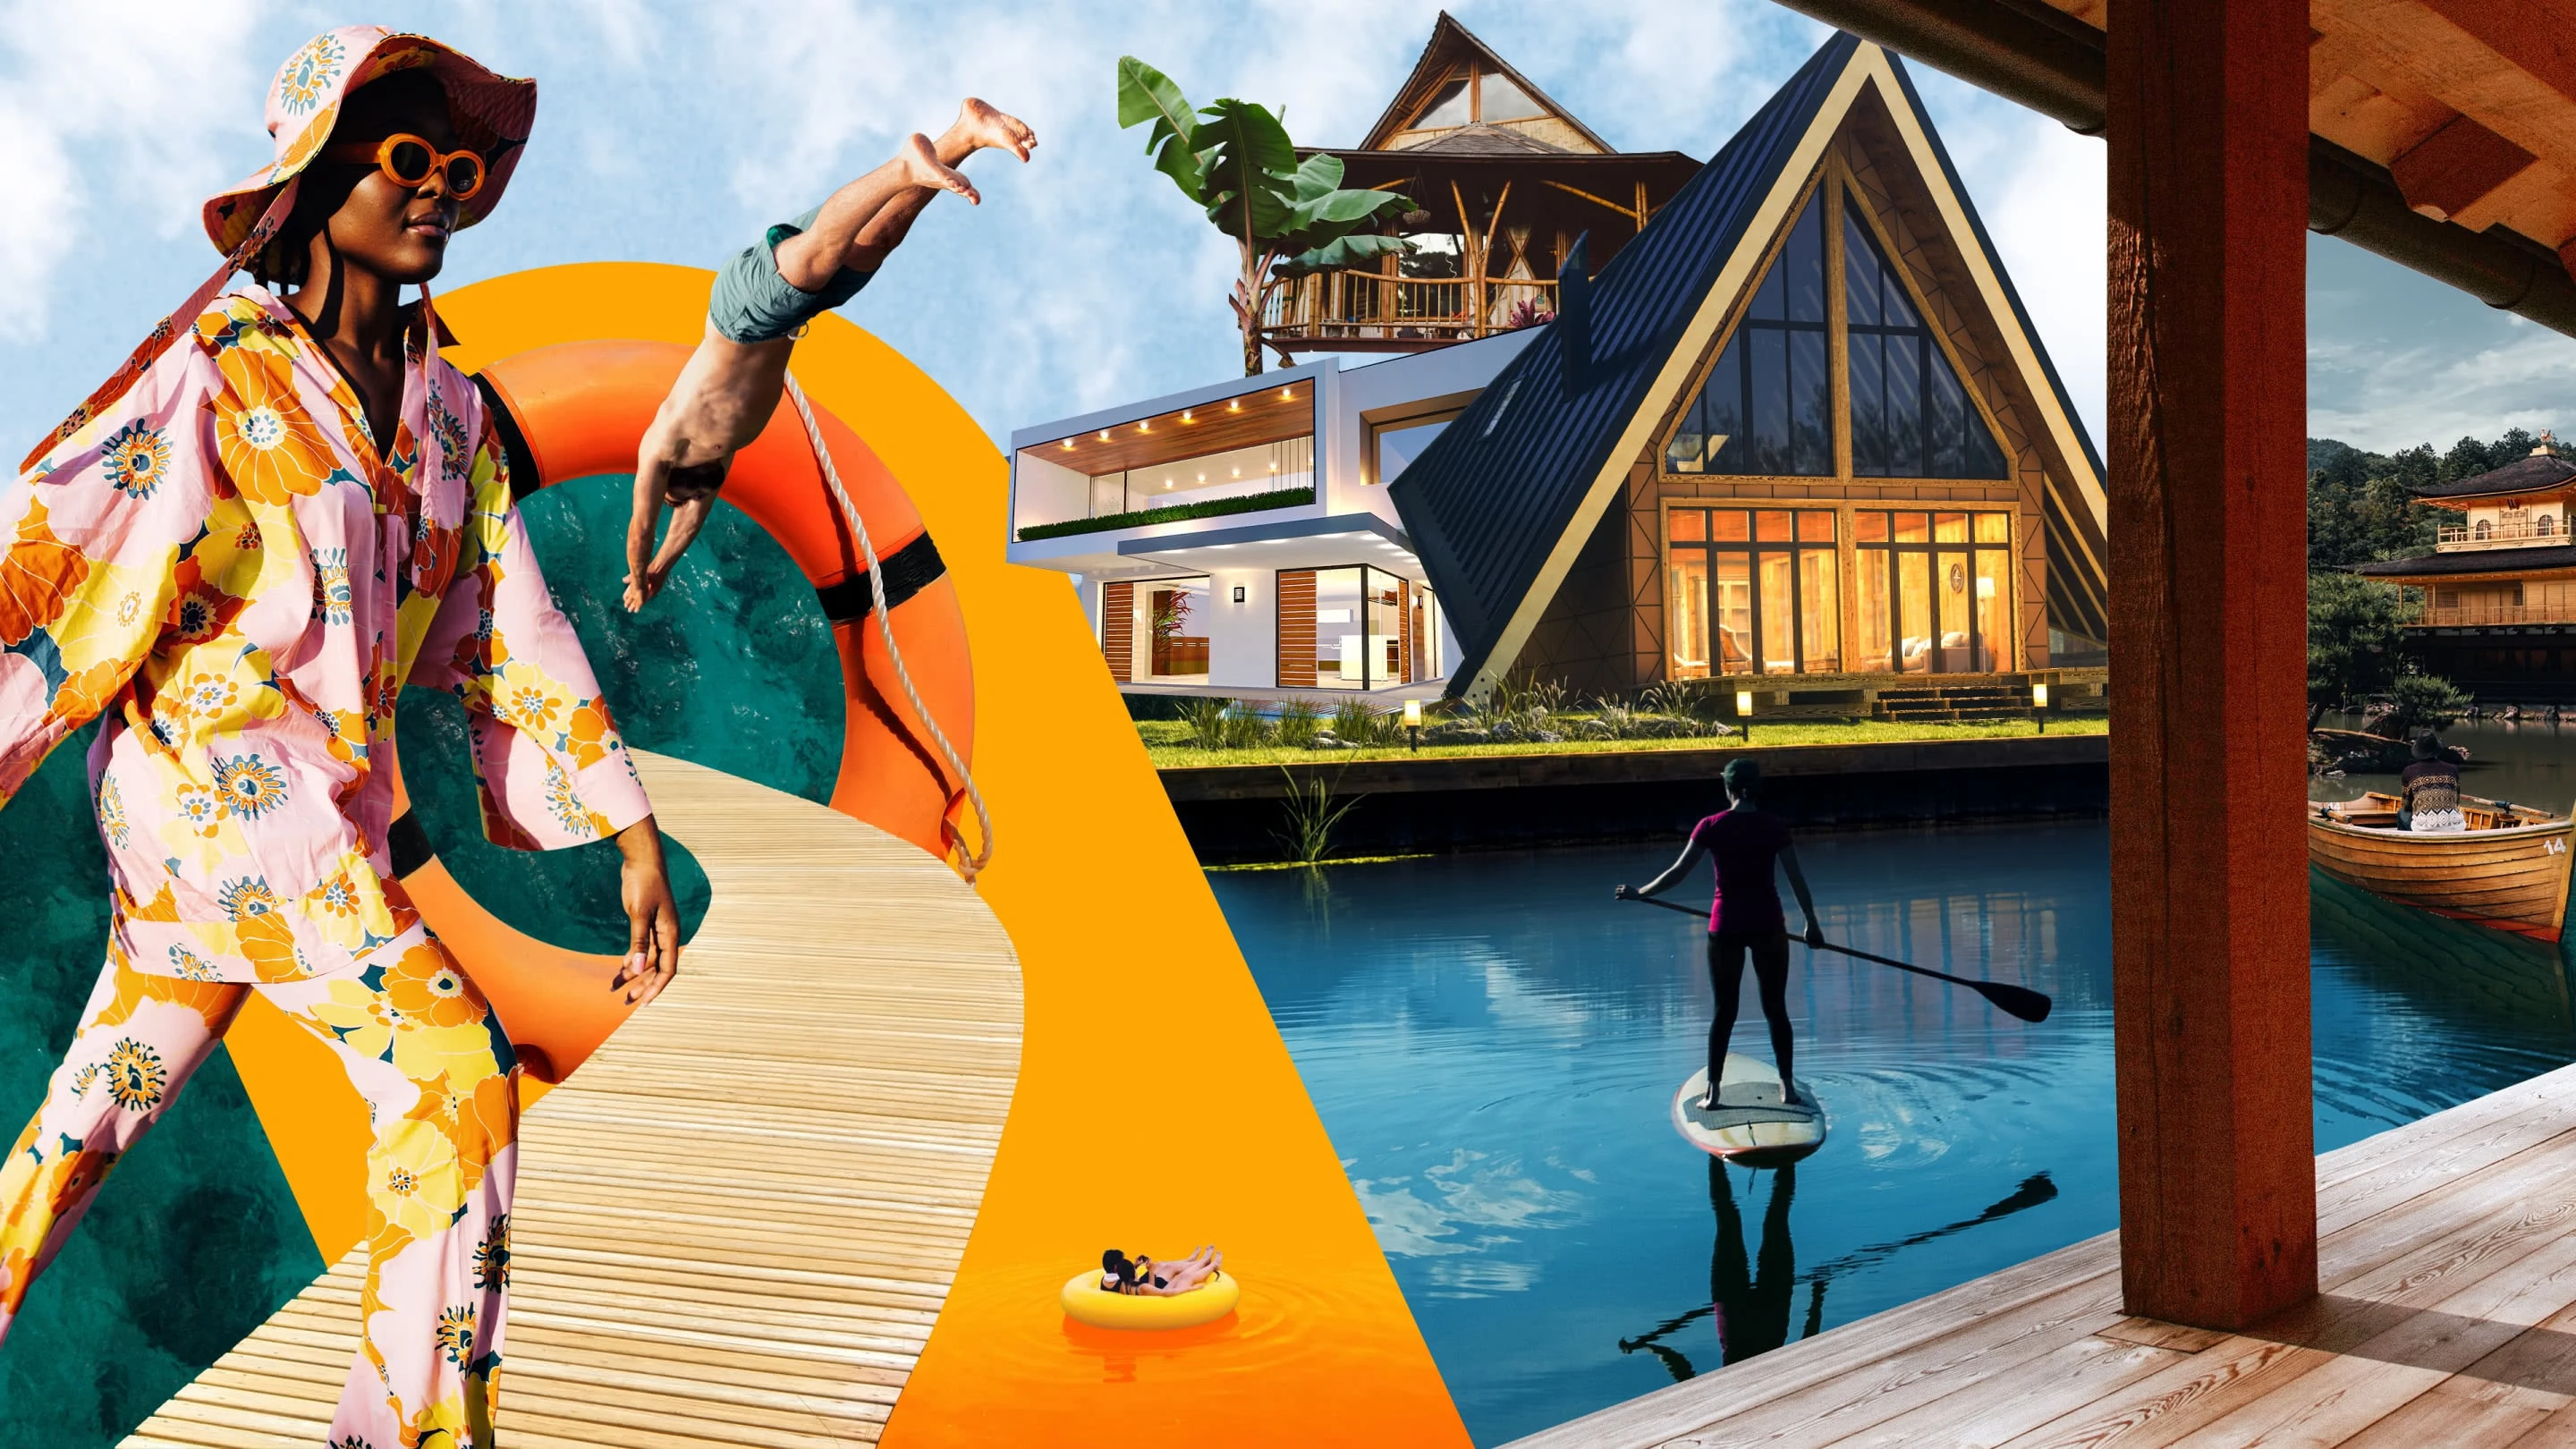 Colorful collage of lake-themed items. Black woman in pink and floral lake outfit at left, next to boardwalk and diver jumping through an orange circle into water. A-frame boat house at center with paddleboarder in a lake. Roofed dock with post at right.